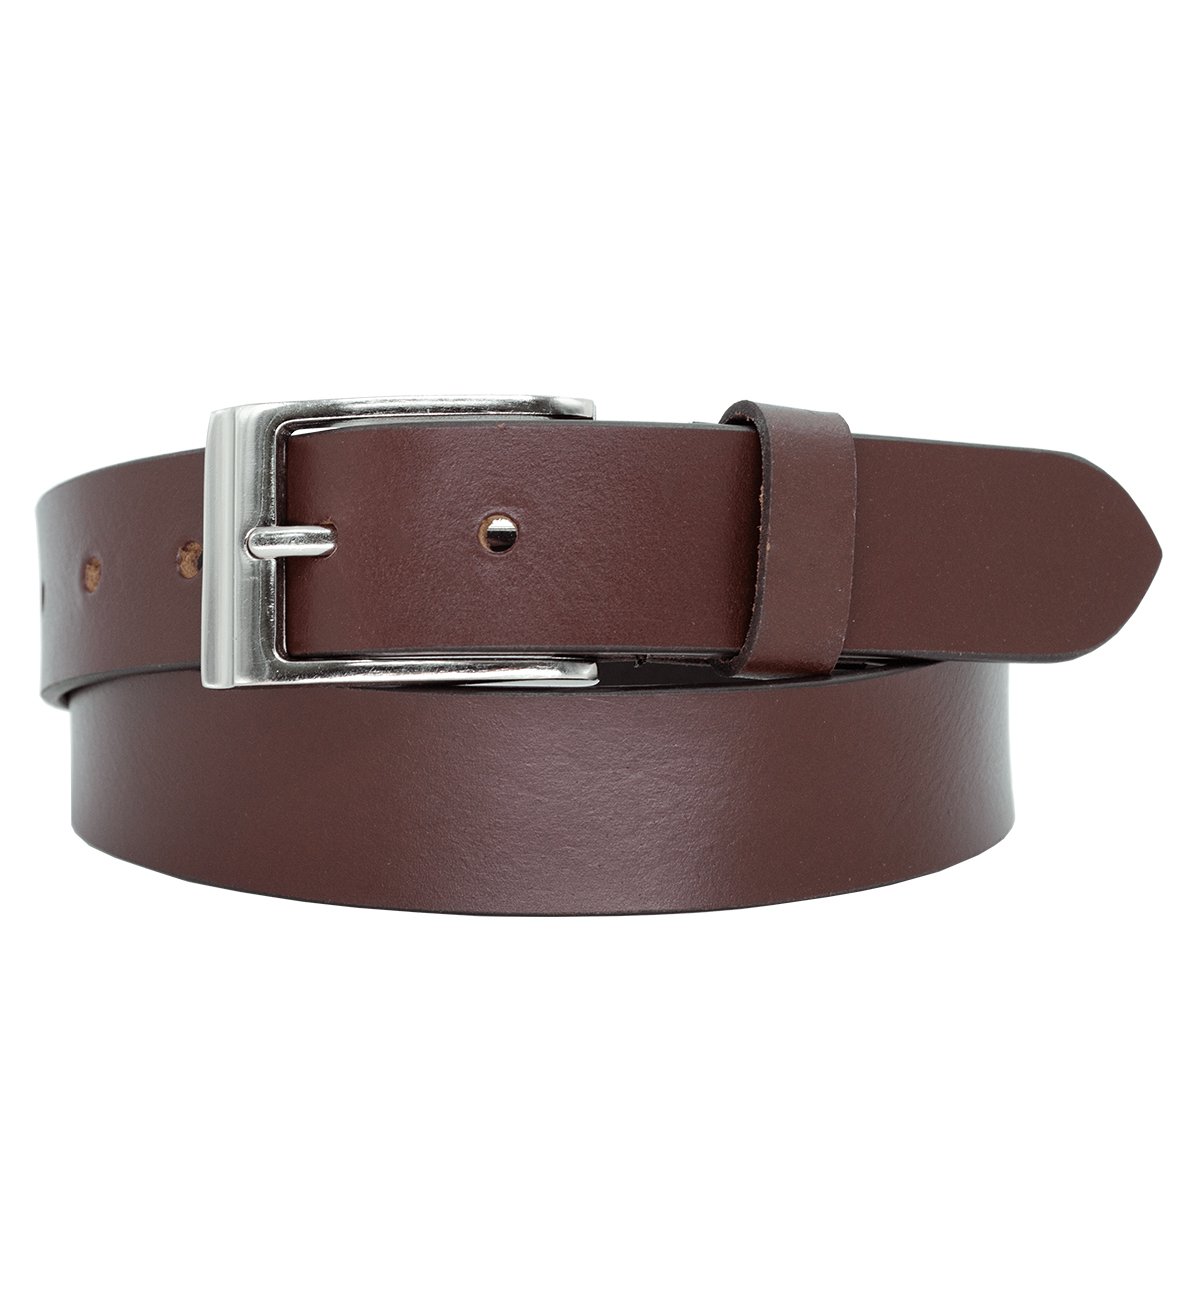 Men's Formal Leather Belt with Heavy Silver Buckle - #BT-1603-1